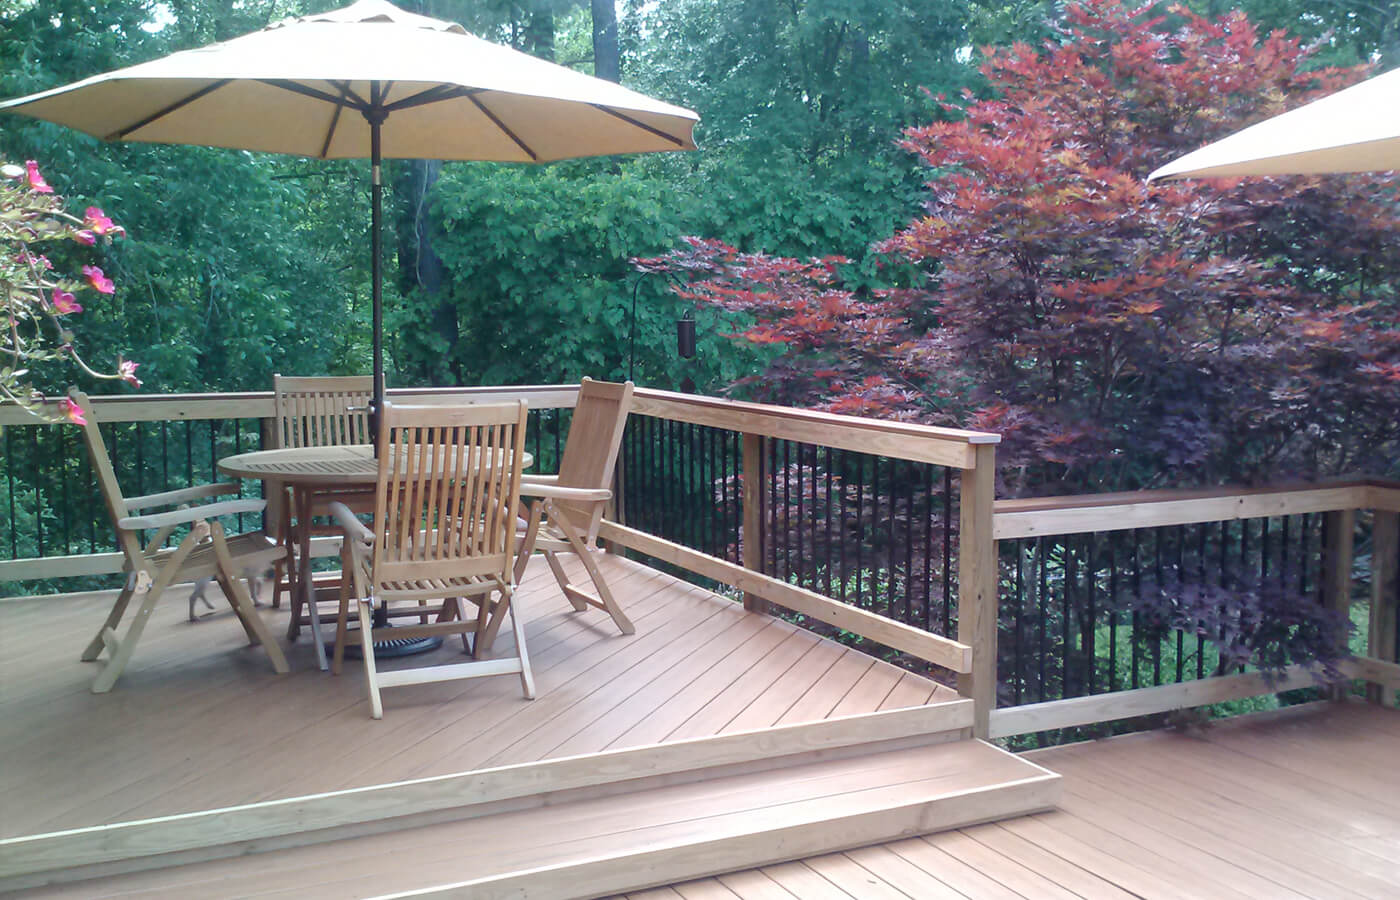 Custom wood deck with seating area